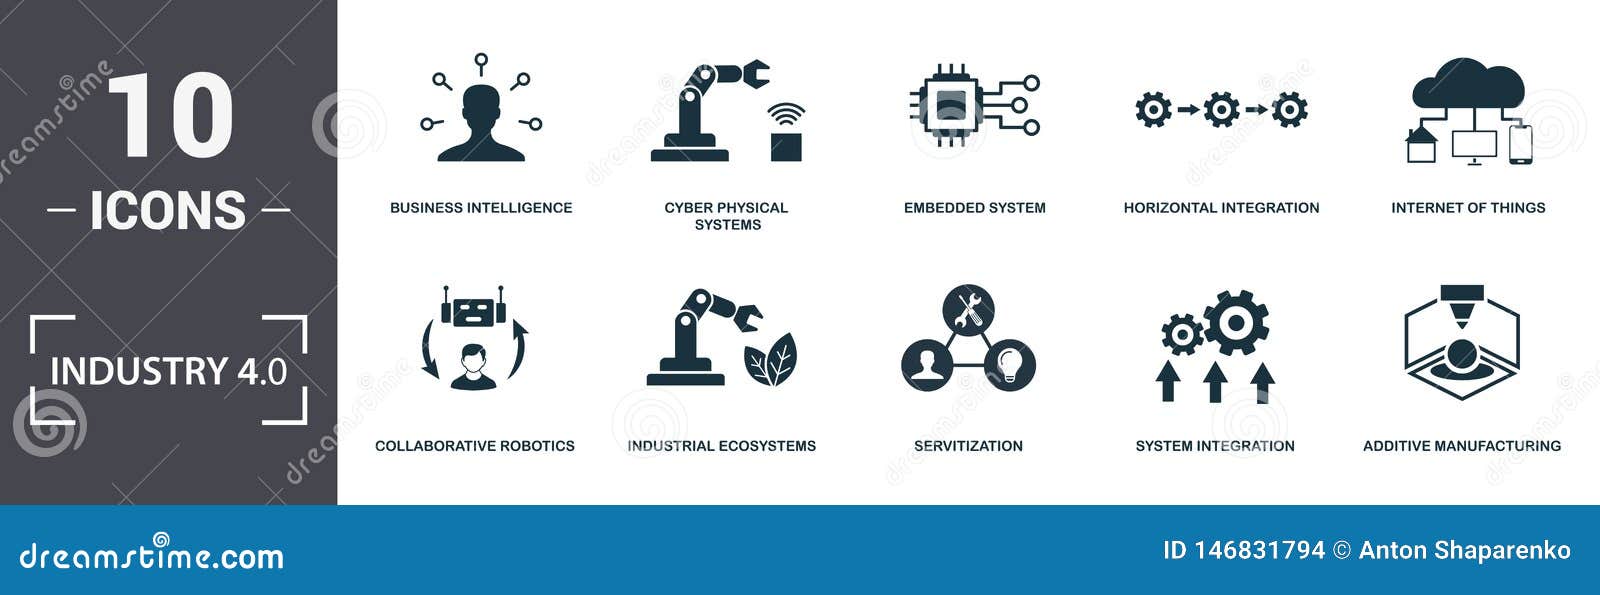 industry 4.0 elements